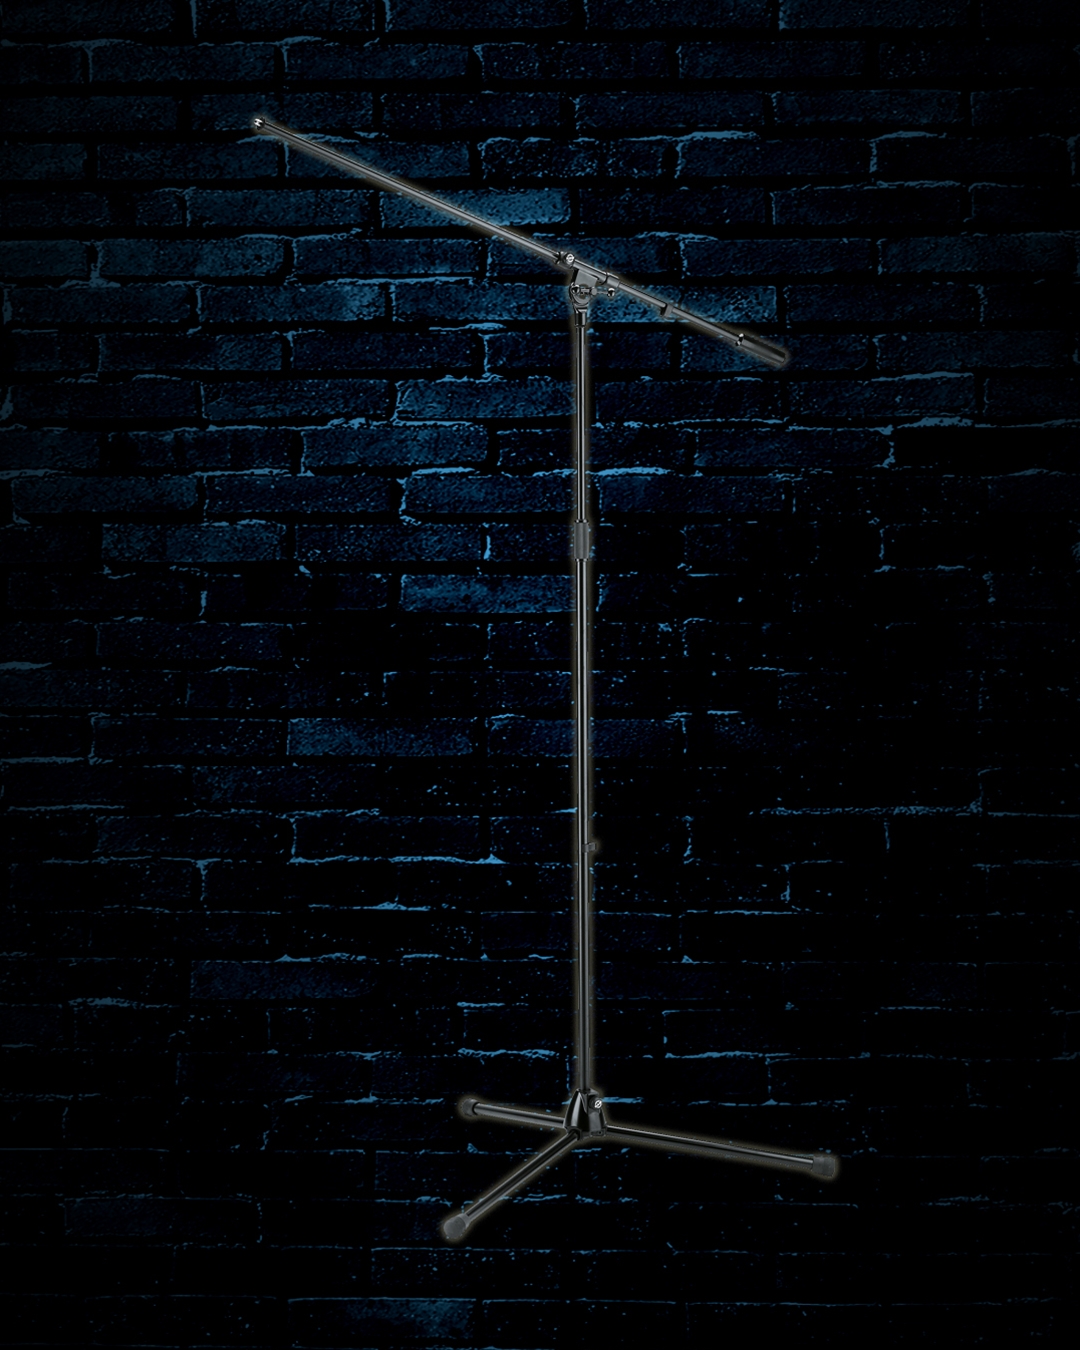 K&M 21021 Extra Tall Boom Microphone Stand - Black